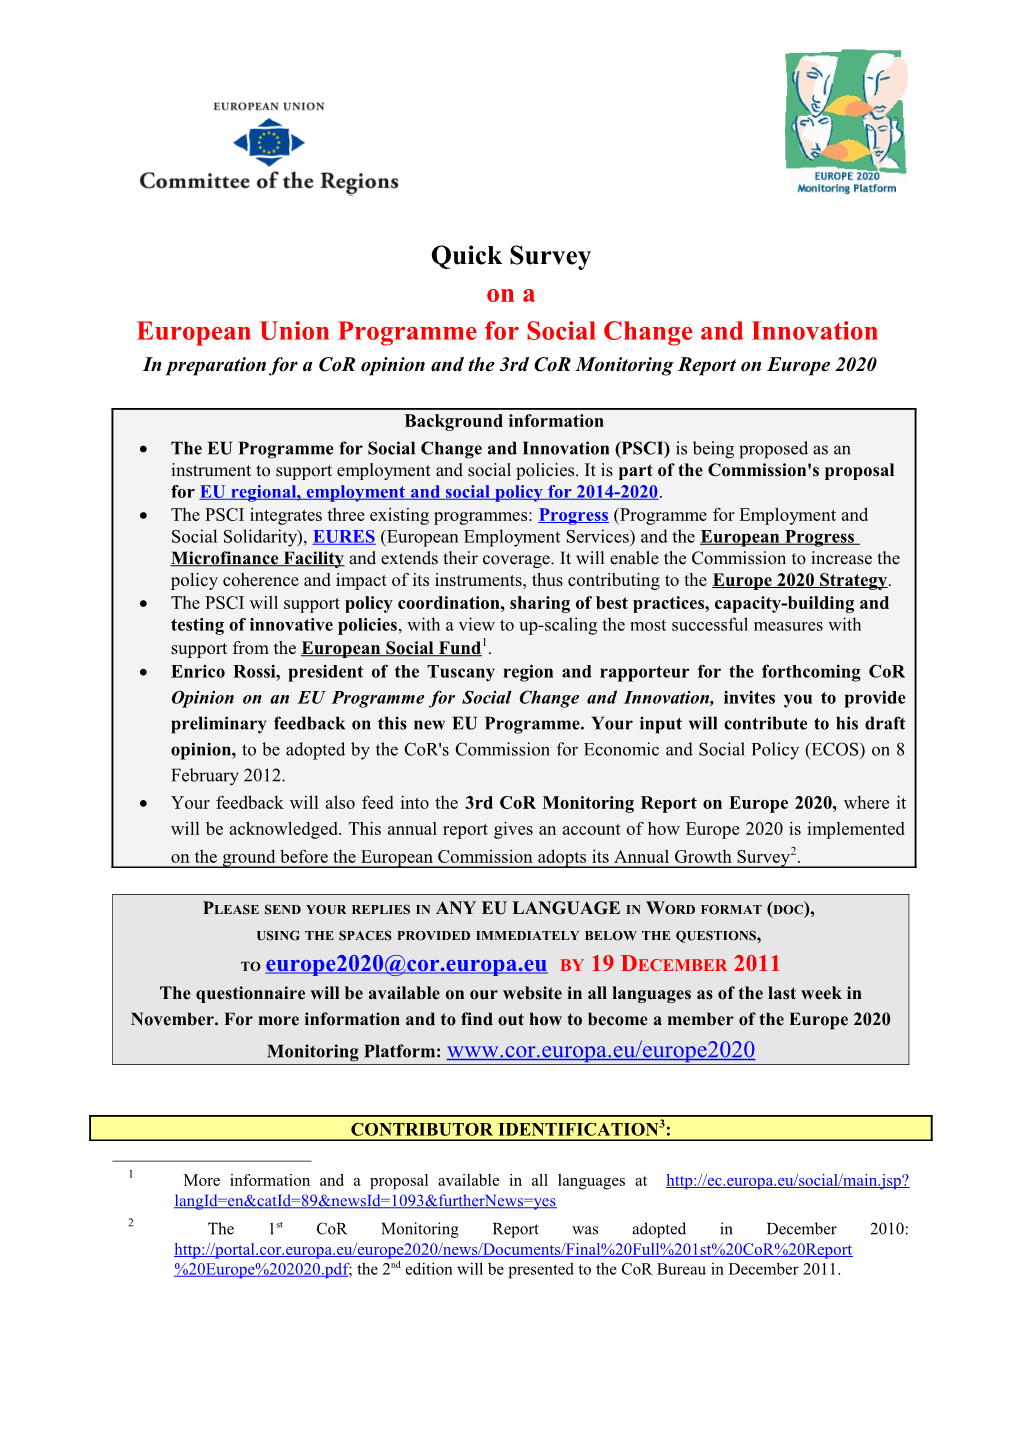 European Union Programme for Social Change and Innovation